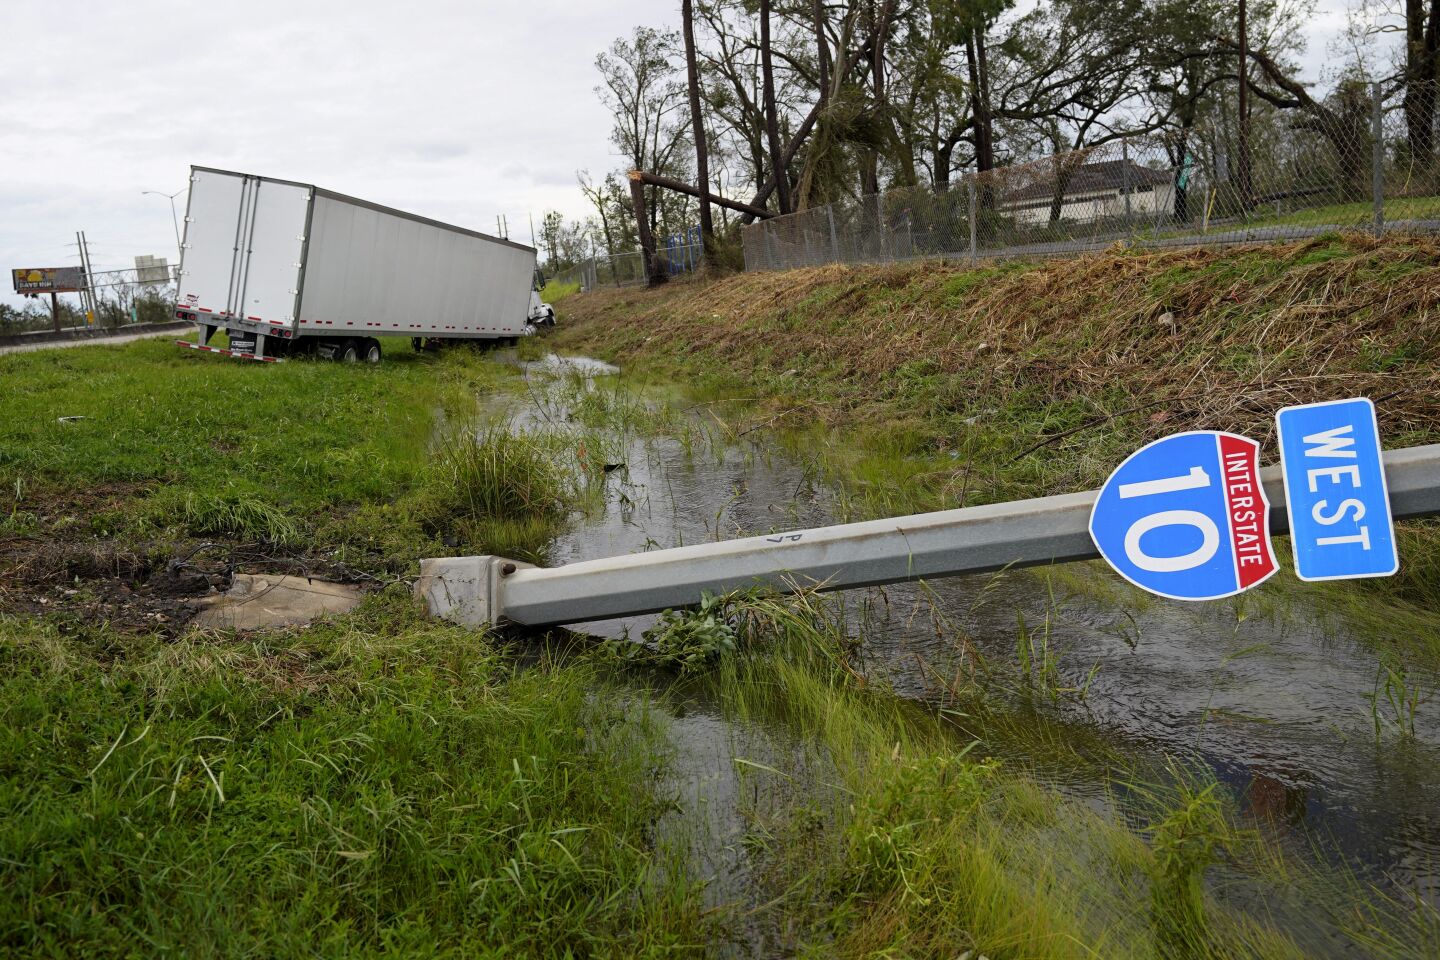 A truck sits in a ditch in Lake Charles, La.